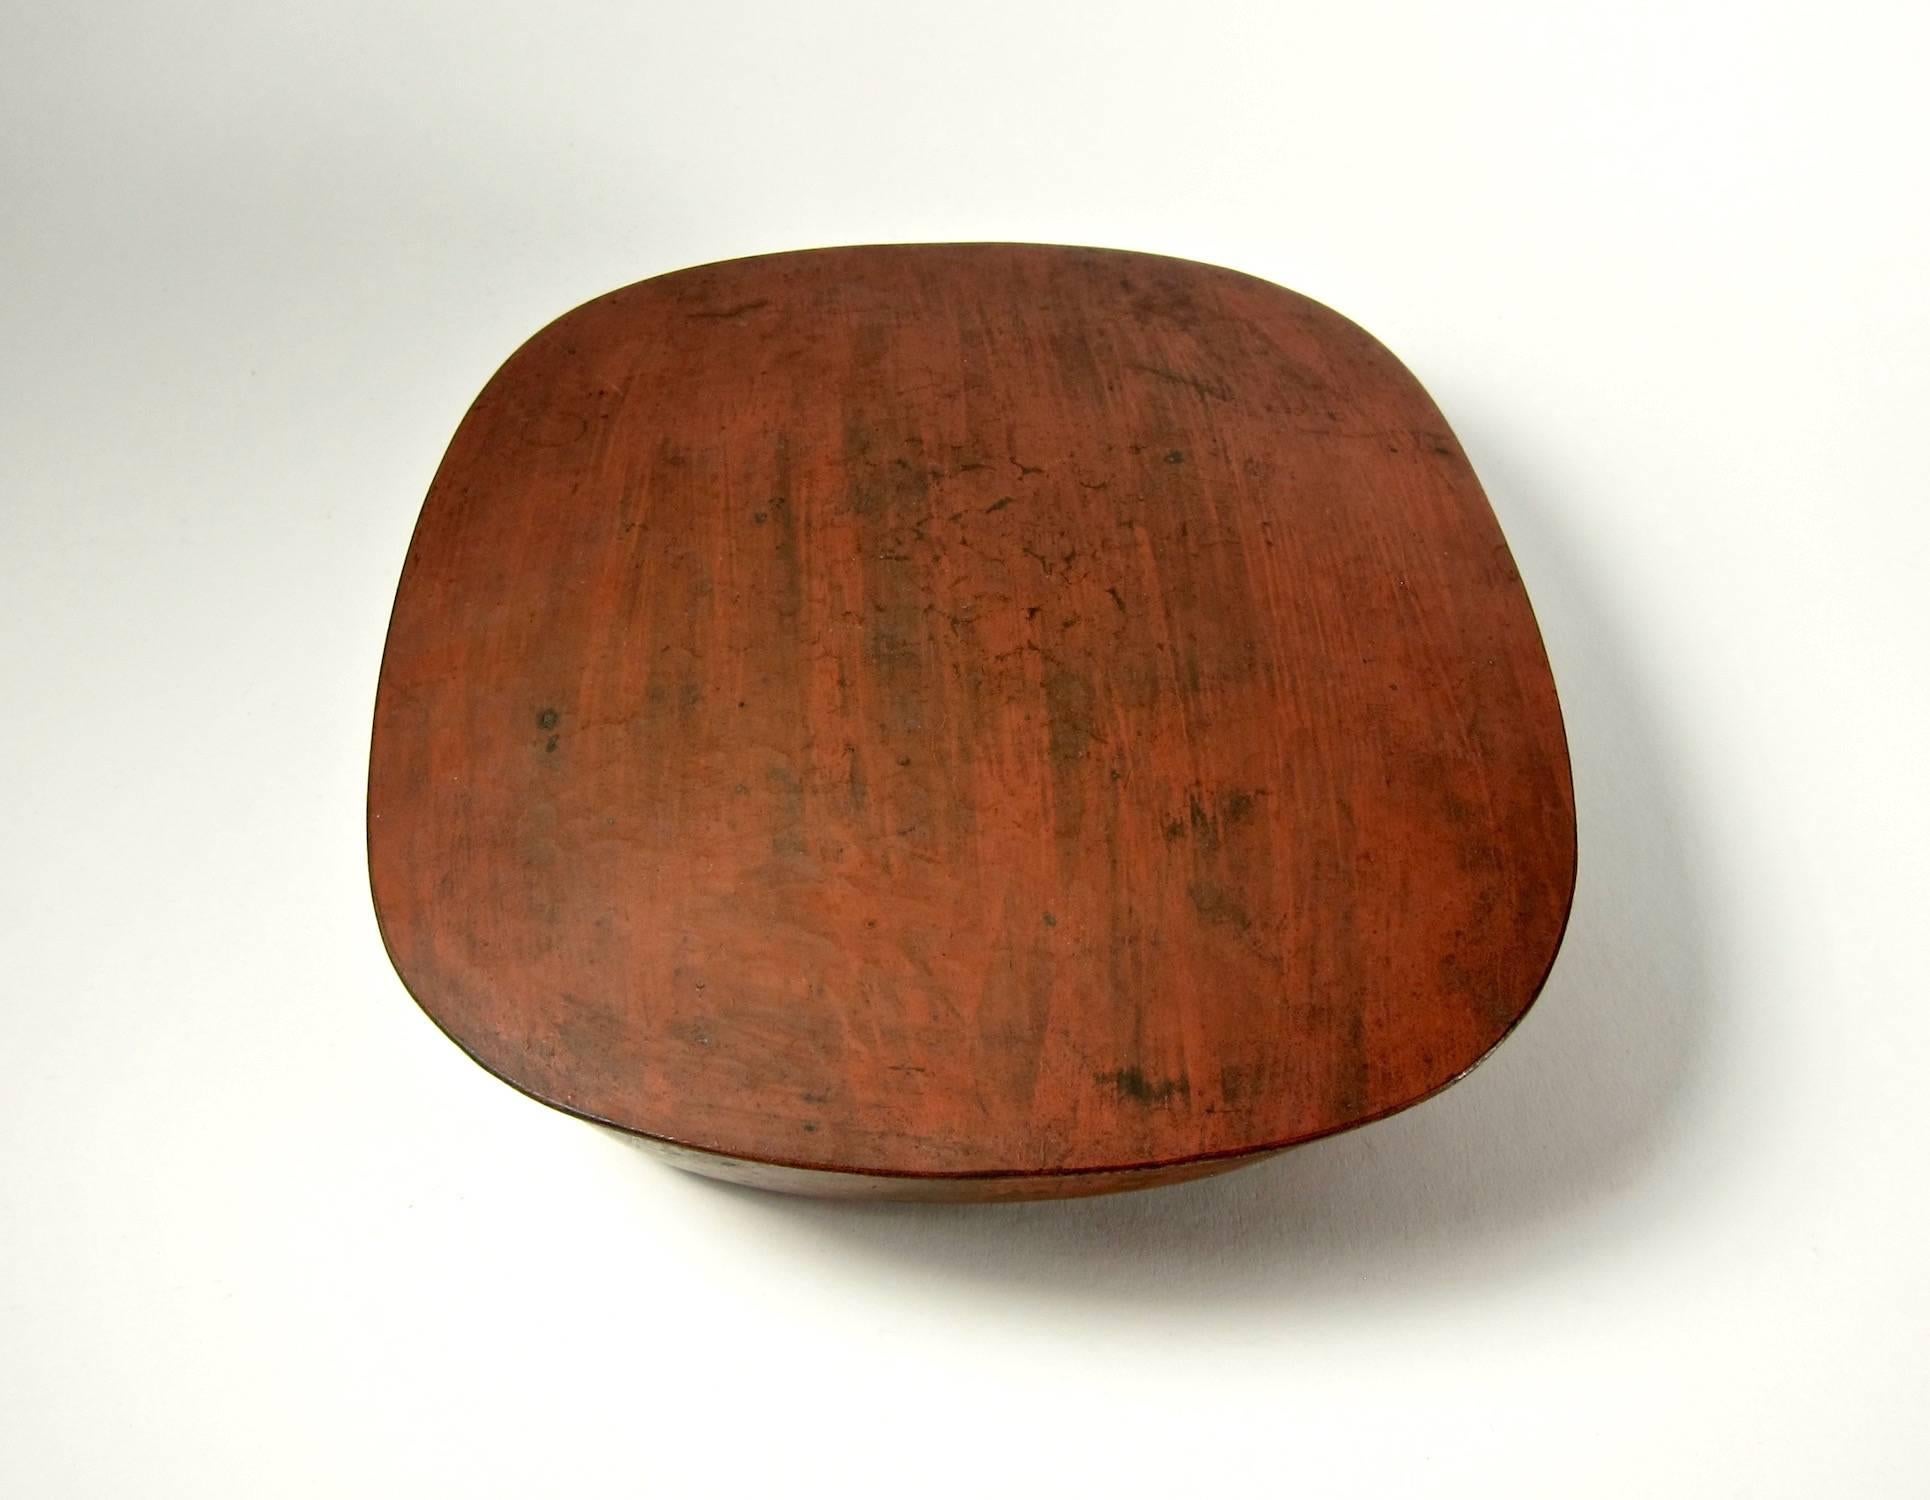 An Antique American covered box of bronze or copper finished with a distinctive red patina by American metalsmith Marie Zimmermann (1879-1972). The box comes directly from the artist's estate and dates to the Arts & Crafts period, circa 1915, while